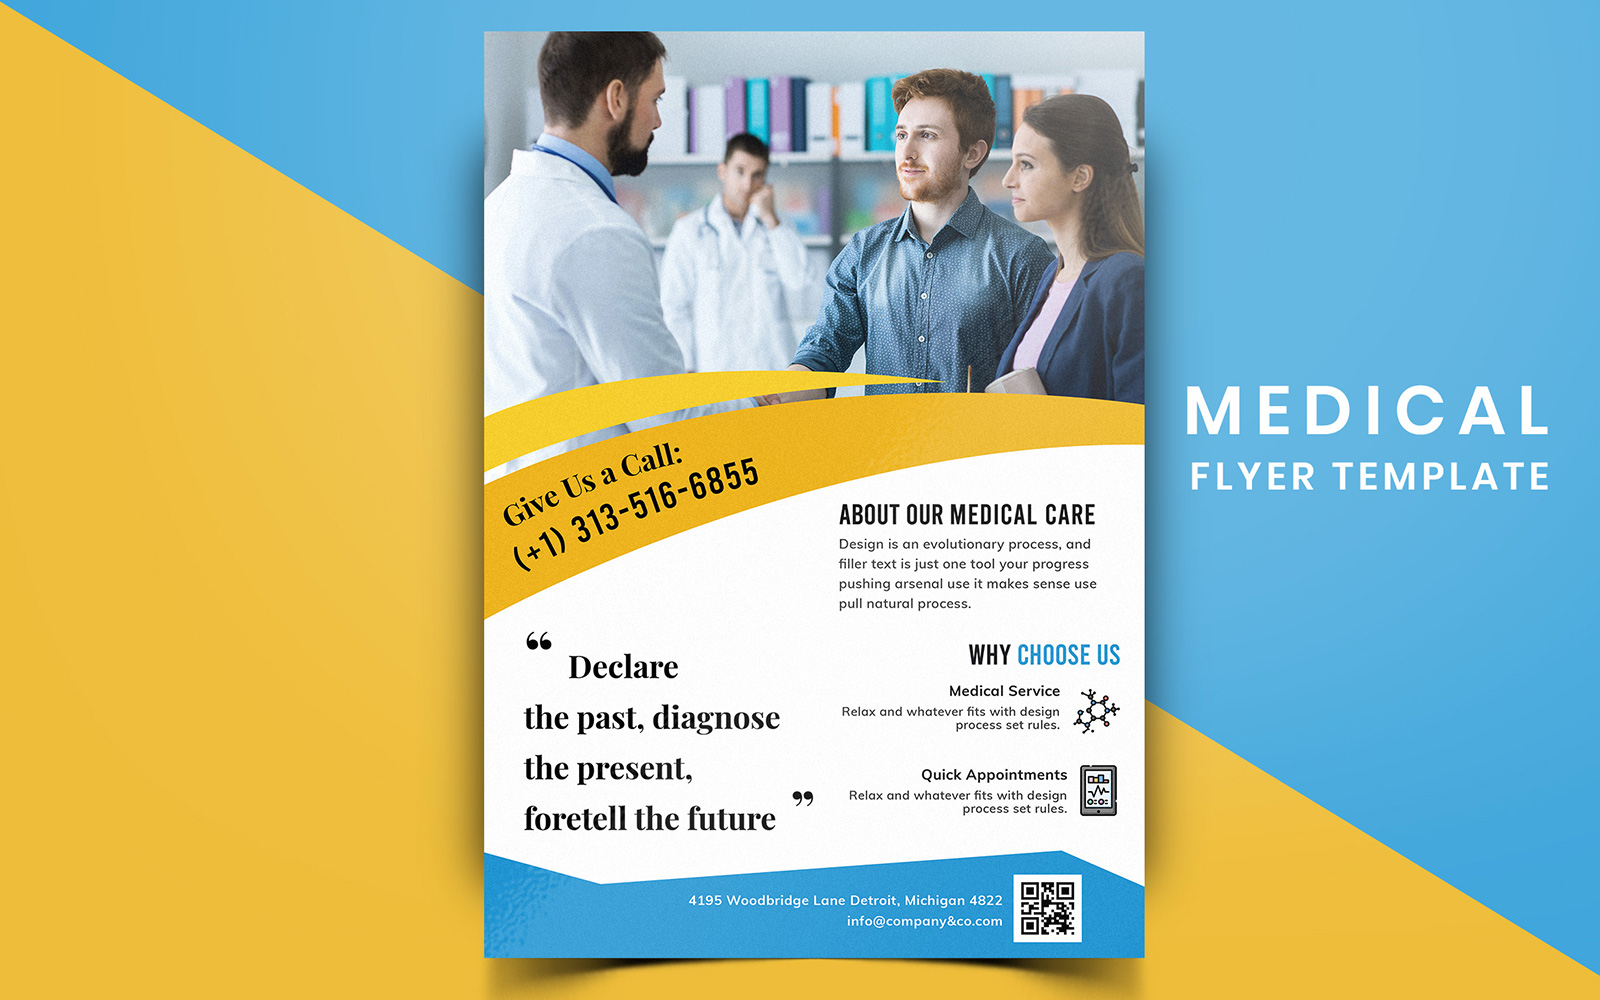 Tubby - Medical Flyer Design - Corporate Identity Template